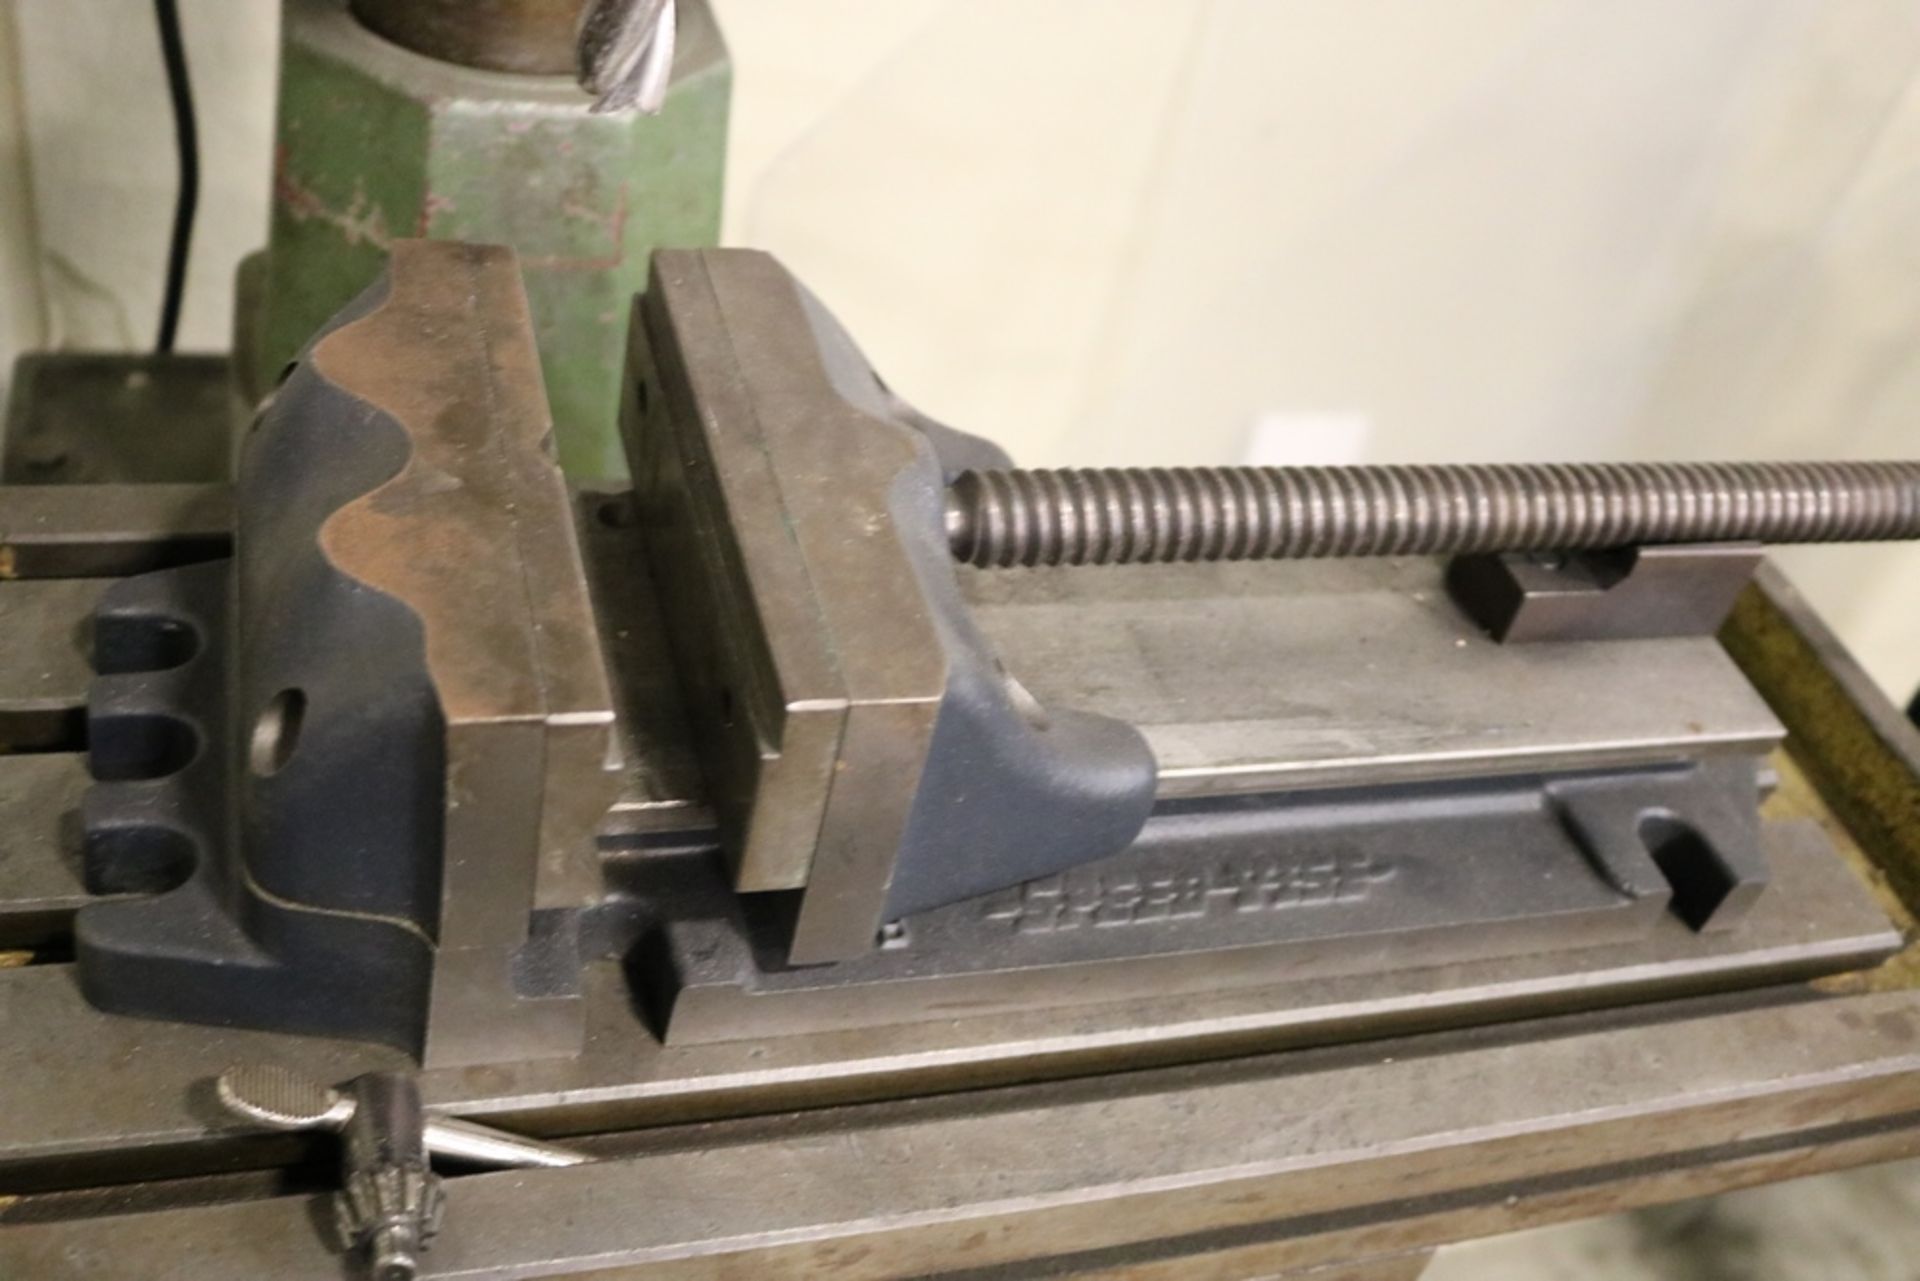 Jet 12 Speed Drilling & Milling Machine Jet-16 1HP 1 Phase Jacob Chuck 6" Speed Vise on Stand - Image 4 of 8